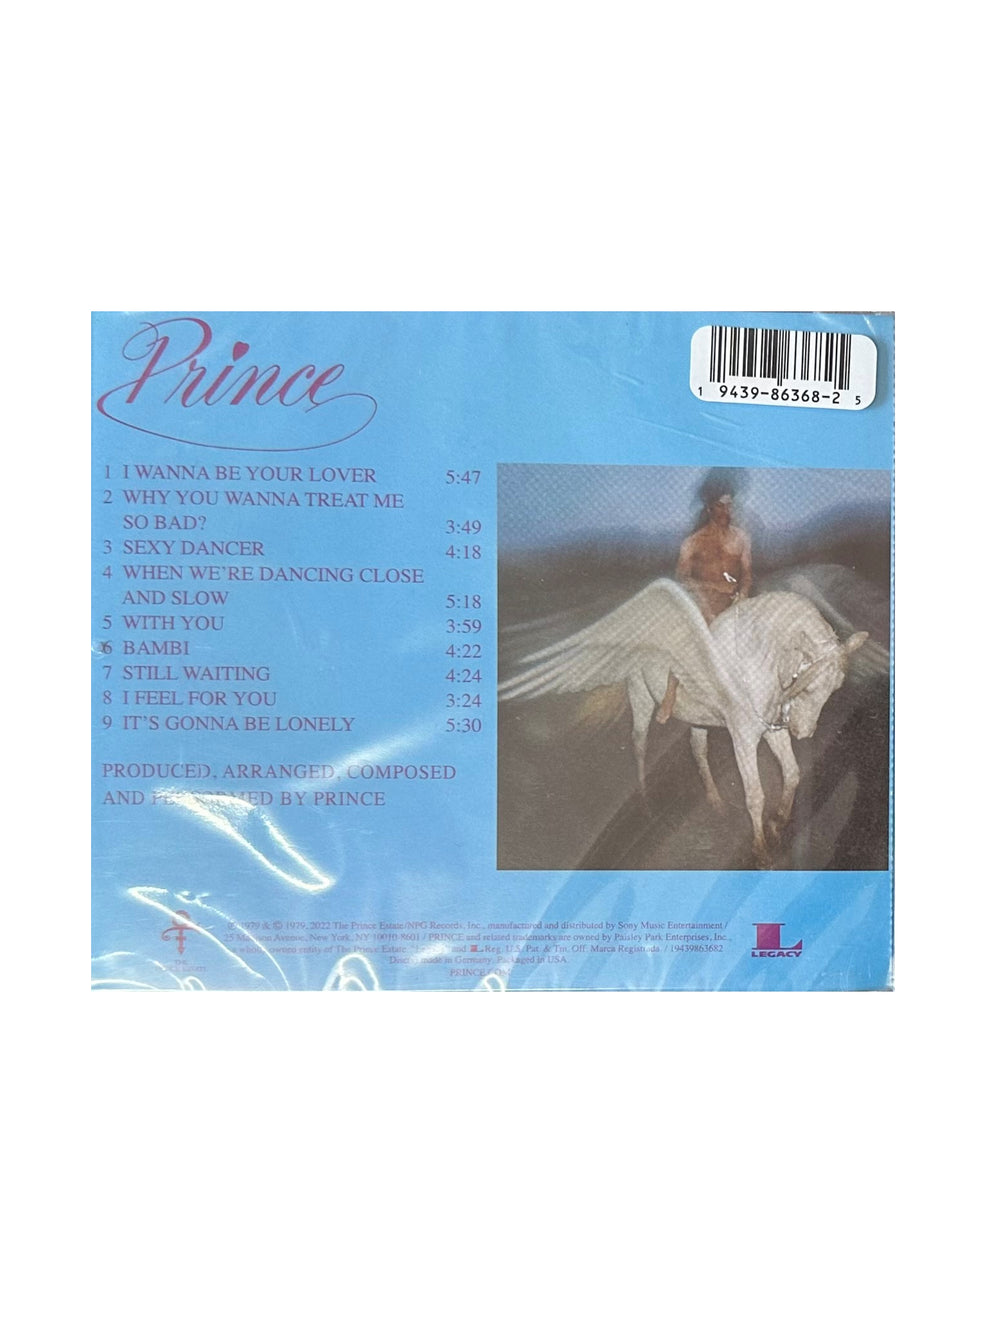 Prince – Prince Self Titled CD Album Reissue Sony Legacy NPG Records NEW 2022